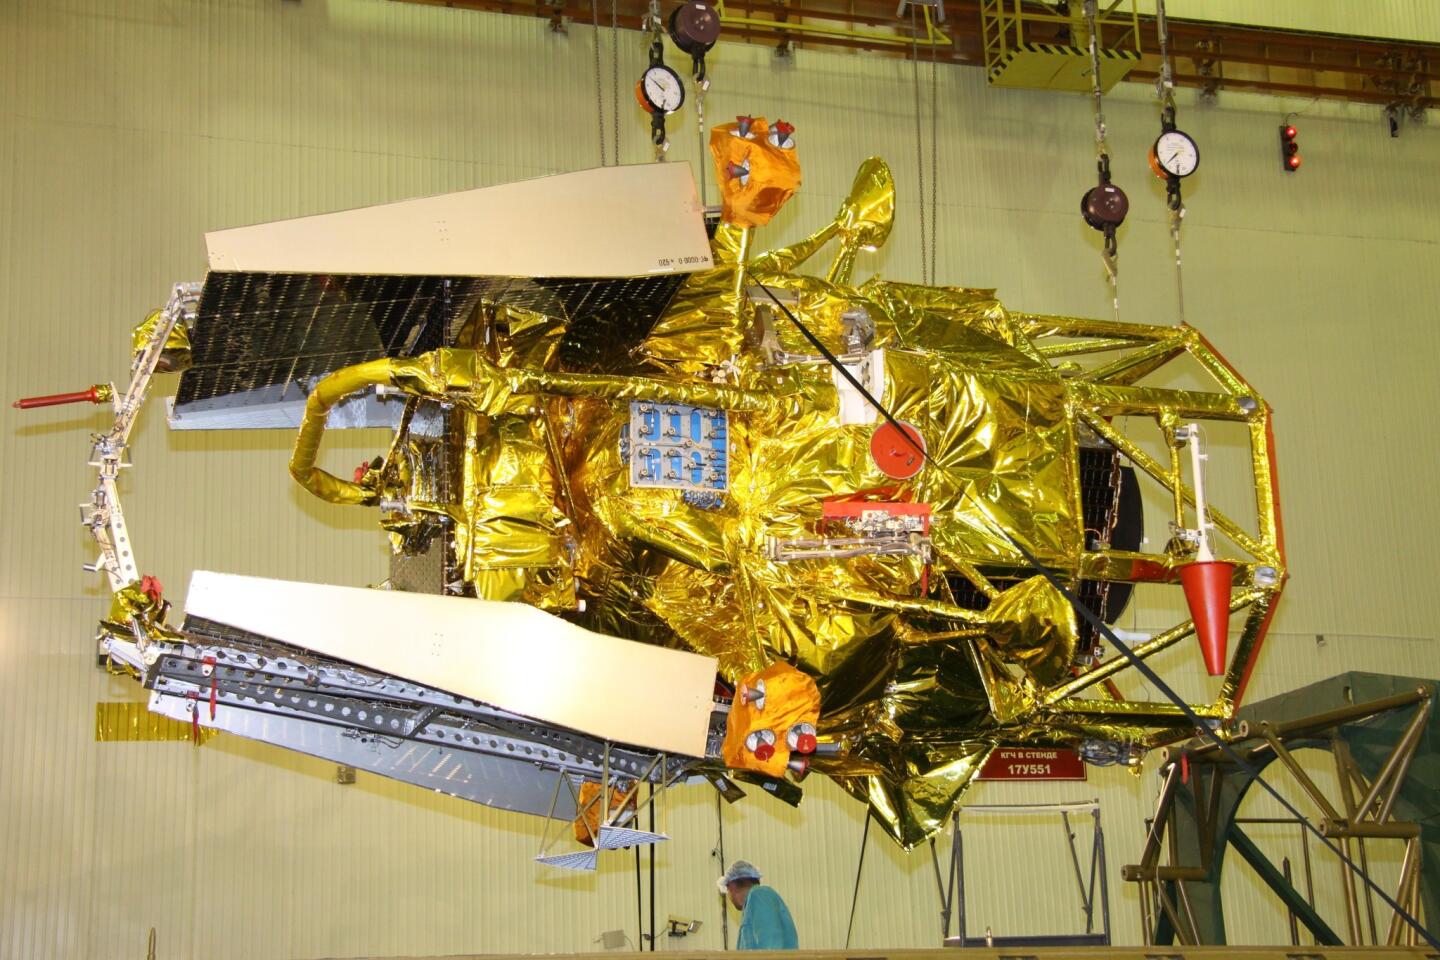 Russia attempted to get back in the Mars game with Fobos-Grunt, but the probe failed to break free of the Earth's orbit and fell into the Pacific Ocean in January 2012.